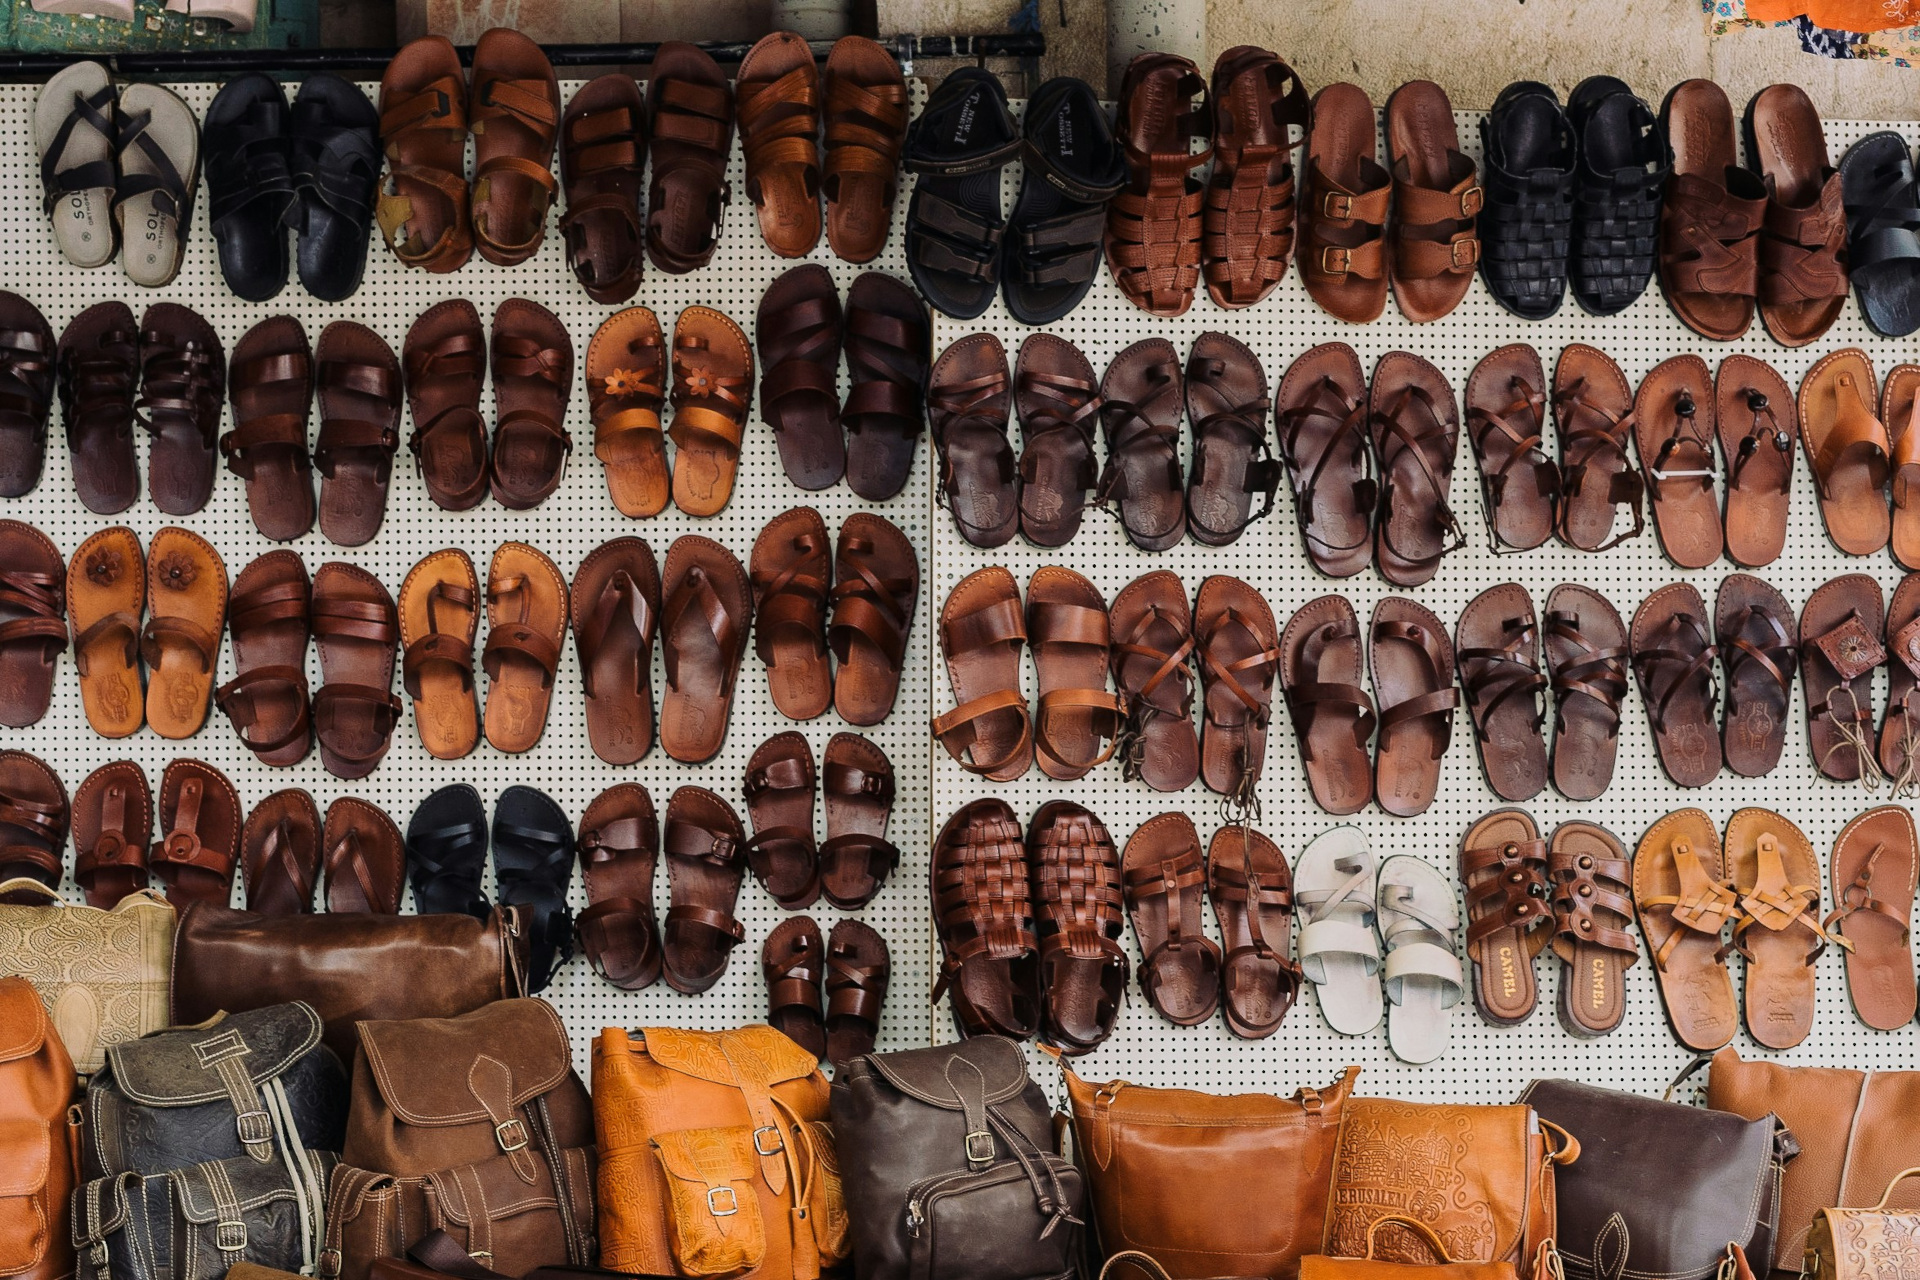 Leather shoes lined up on leather wall over bags